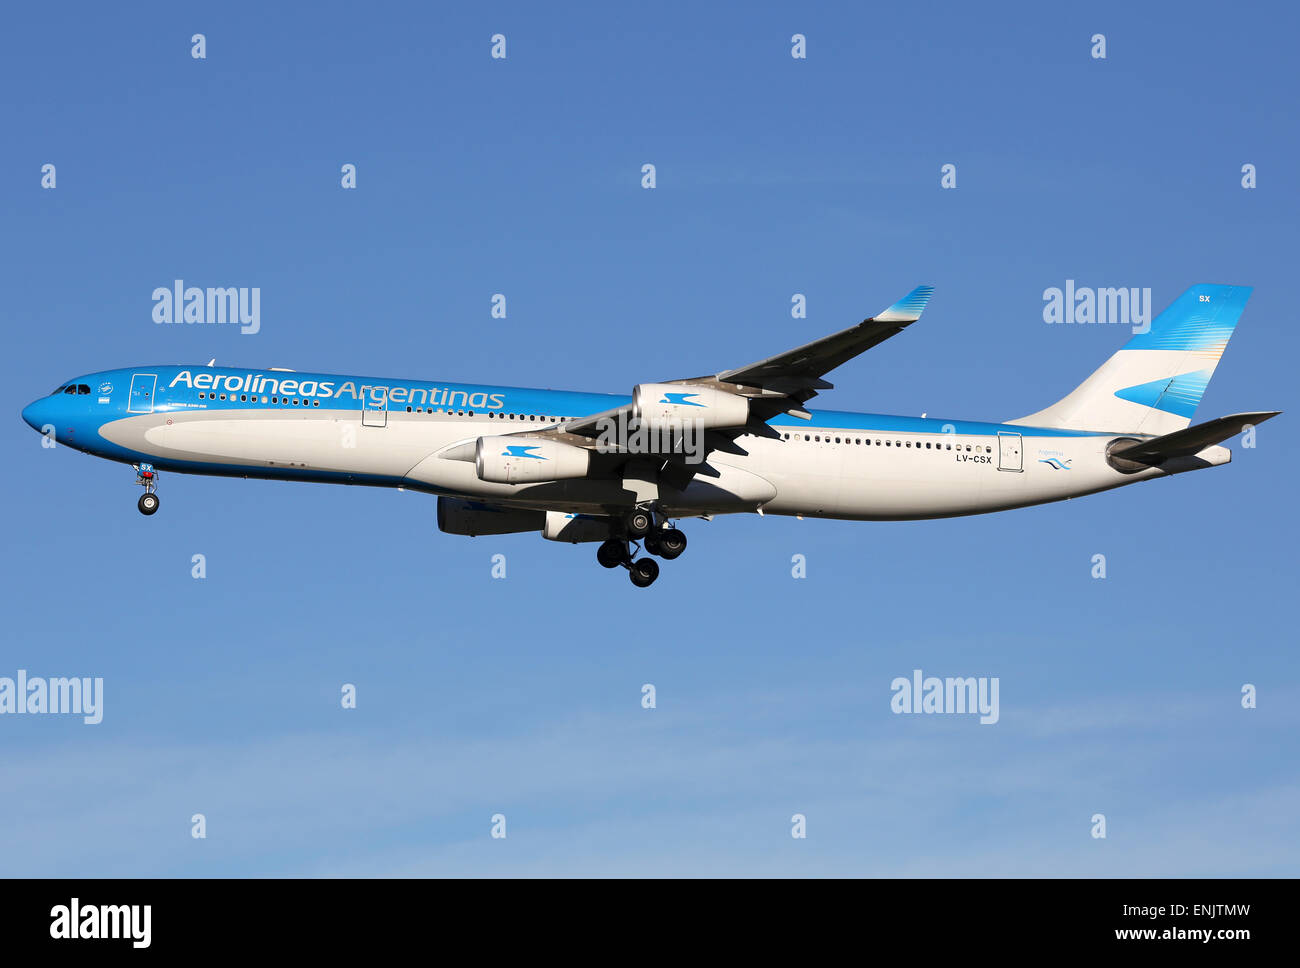 Madrid, Spain - March 5, 2015: An Aerolineas Argentinas Airbus A340 with the registration LV-CSX landing at Madrid Airport (MAD) Stock Photo